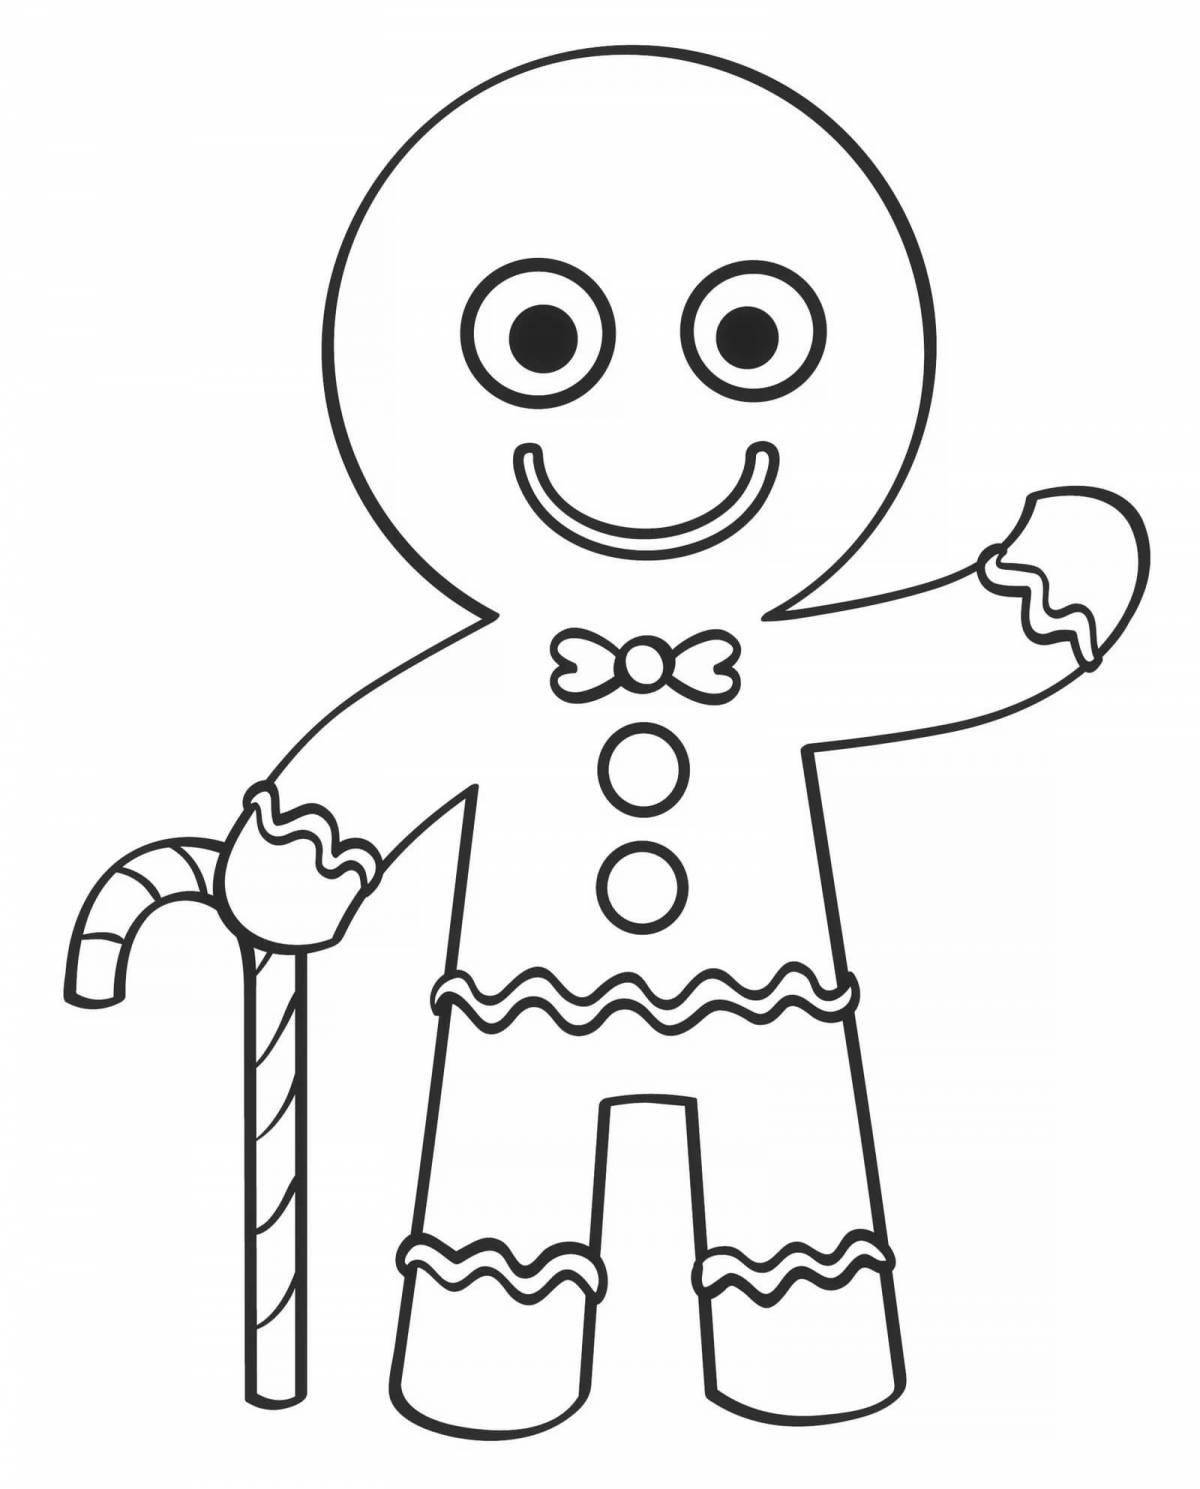 Adorable gingerbread man coloring page